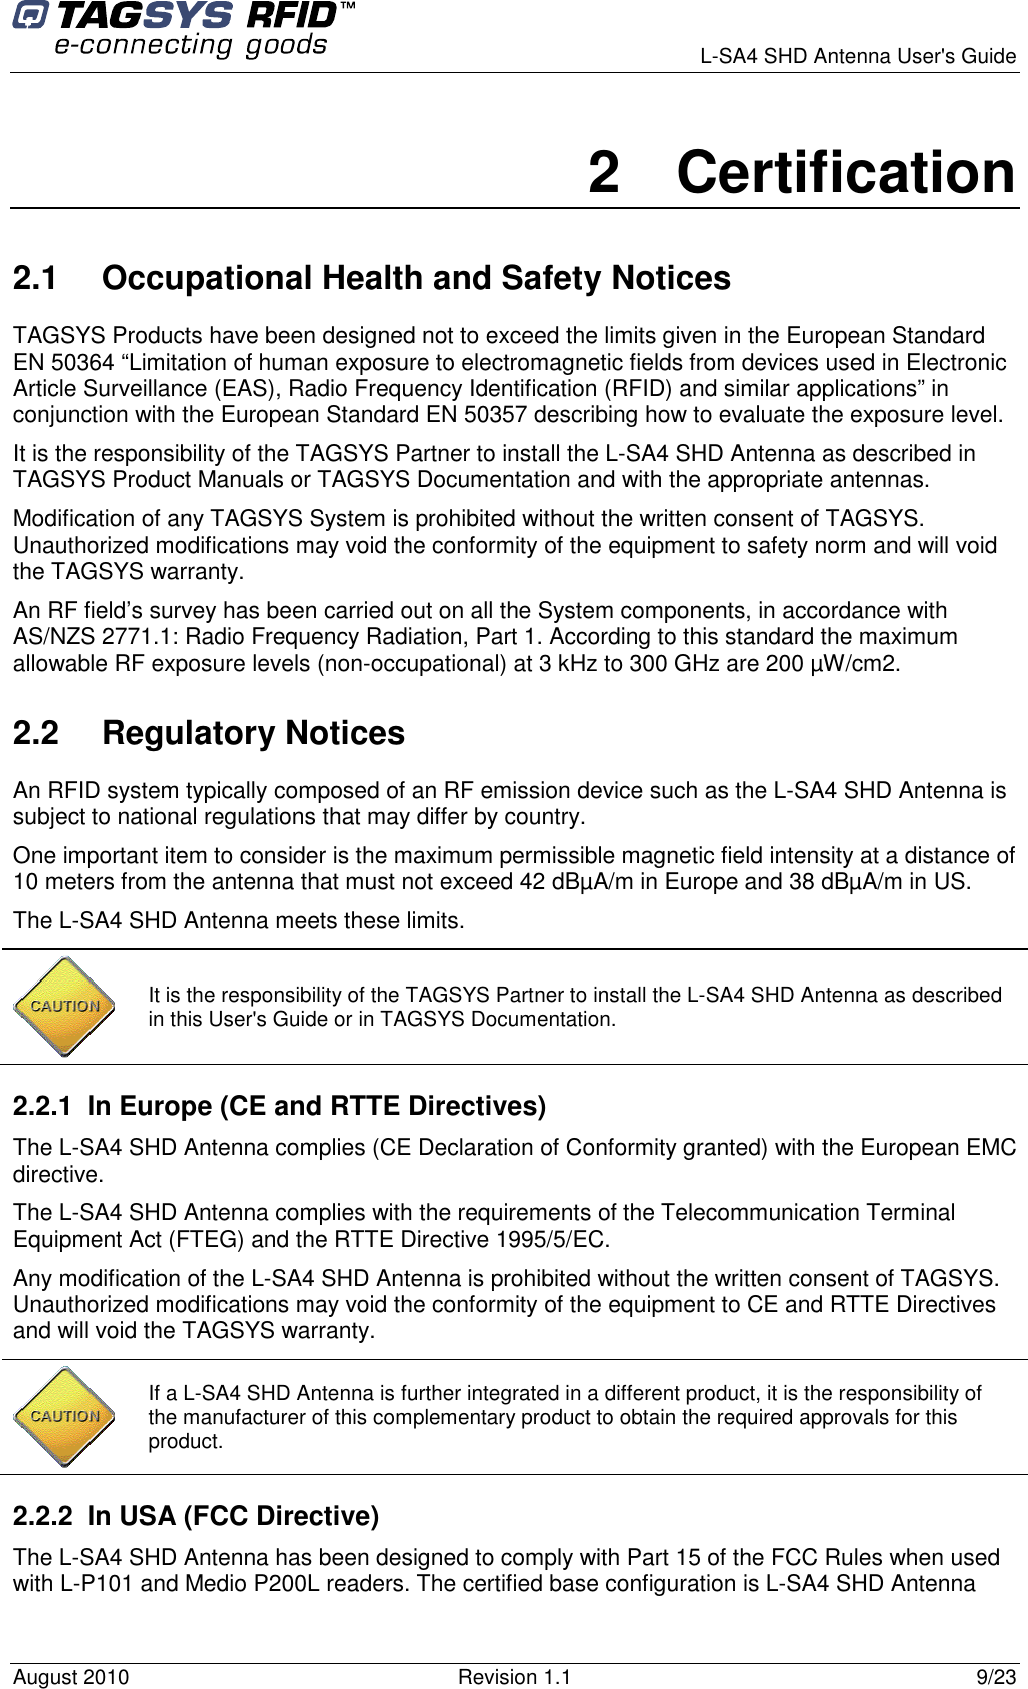      L-SA4 SHD Antenna User&apos;s Guide August 2010  Revision 1.1  9/23 2  Certification 2.1  Occupational Health and Safety Notices TAGSYS Products have been designed not to exceed the limits given in the European Standard EN 50364 “Limitation of human exposure to electromagnetic fields from devices used in Electronic Article Surveillance (EAS), Radio Frequency Identification (RFID) and similar applications” in conjunction with the European Standard EN 50357 describing how to evaluate the exposure level. It is the responsibility of the TAGSYS Partner to install the L-SA4 SHD Antenna as described in TAGSYS Product Manuals or TAGSYS Documentation and with the appropriate antennas.  Modification of any TAGSYS System is prohibited without the written consent of TAGSYS. Unauthorized modifications may void the conformity of the equipment to safety norm and will void the TAGSYS warranty. An RF field’s survey has been carried out on all the System components, in accordance with AS/NZS 2771.1: Radio Frequency Radiation, Part 1. According to this standard the maximum allowable RF exposure levels (non-occupational) at 3 kHz to 300 GHz are 200 µW/cm2.  2.2  Regulatory Notices An RFID system typically composed of an RF emission device such as the L-SA4 SHD Antenna is subject to national regulations that may differ by country. One important item to consider is the maximum permissible magnetic field intensity at a distance of 10 meters from the antenna that must not exceed 42 dBµA/m in Europe and 38 dBµA/m in US. The L-SA4 SHD Antenna meets these limits. 2.2.1  In Europe (CE and RTTE Directives)  The L-SA4 SHD Antenna complies (CE Declaration of Conformity granted) with the European EMC directive. The L-SA4 SHD Antenna complies with the requirements of the Telecommunication Terminal Equipment Act (FTEG) and the RTTE Directive 1995/5/EC. Any modification of the L-SA4 SHD Antenna is prohibited without the written consent of TAGSYS. Unauthorized modifications may void the conformity of the equipment to CE and RTTE Directives and will void the TAGSYS warranty.  2.2.2  In USA (FCC Directive) The L-SA4 SHD Antenna has been designed to comply with Part 15 of the FCC Rules when used with L-P101 and Medio P200L readers. The certified base configuration is L-SA4 SHD Antenna  It is the responsibility of the TAGSYS Partner to install the L-SA4 SHD Antenna as described in this User&apos;s Guide or in TAGSYS Documentation.  If a L-SA4 SHD Antenna is further integrated in a different product, it is the responsibility of the manufacturer of this complementary product to obtain the required approvals for this product. 